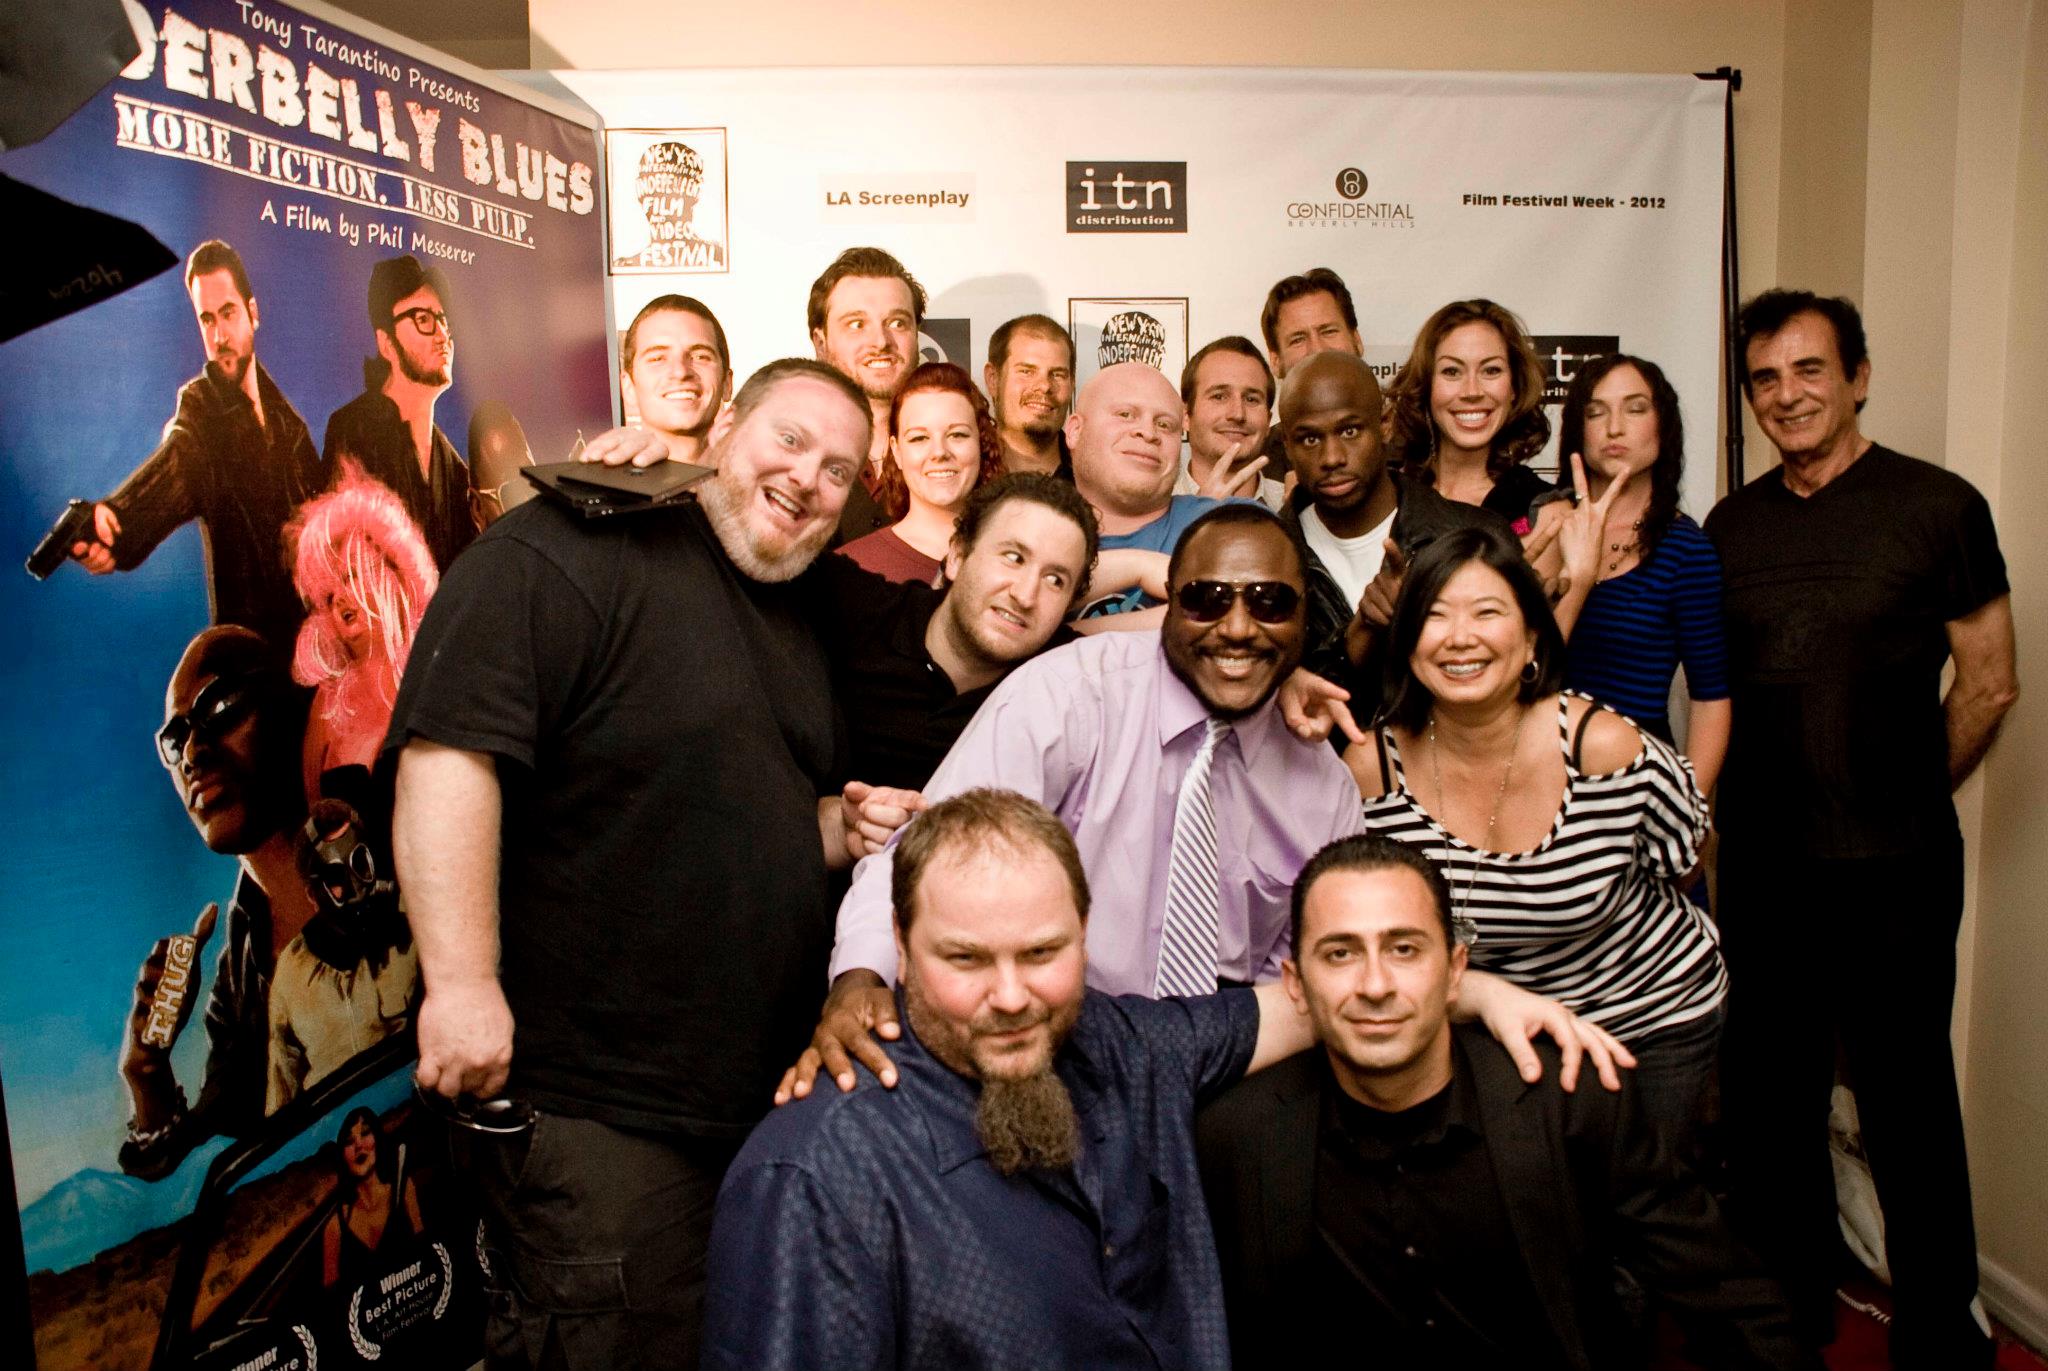 Underbelly Blues cast and crew at the Independent Film Quarterly Film Magazine Film Festival.